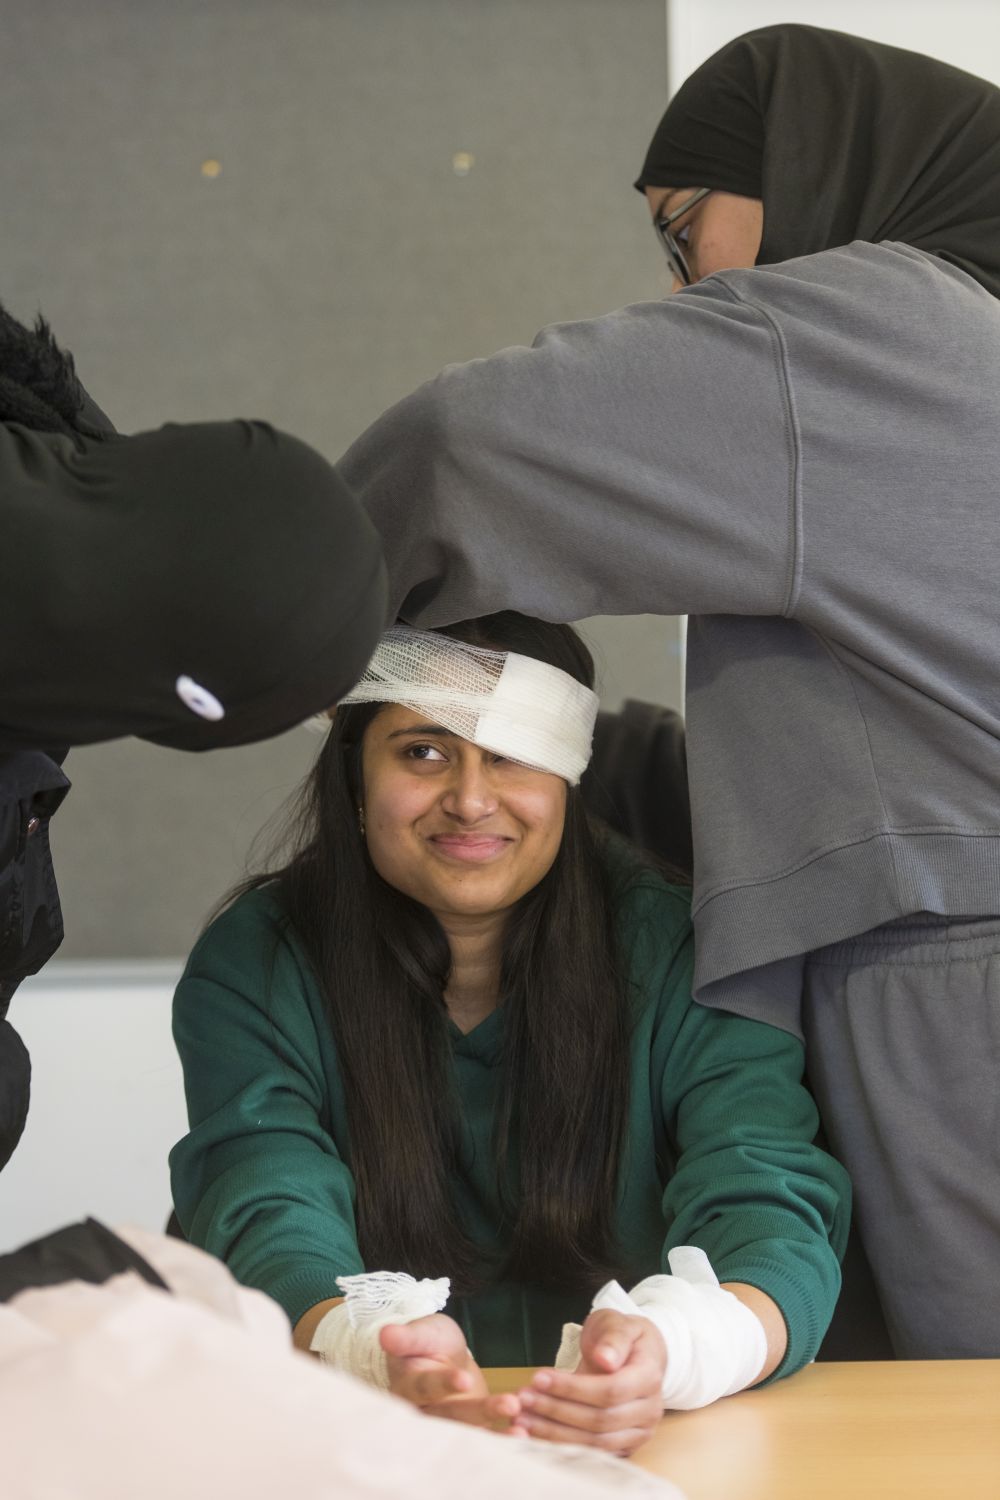 two female students working together to practice applying bandages on a third female student